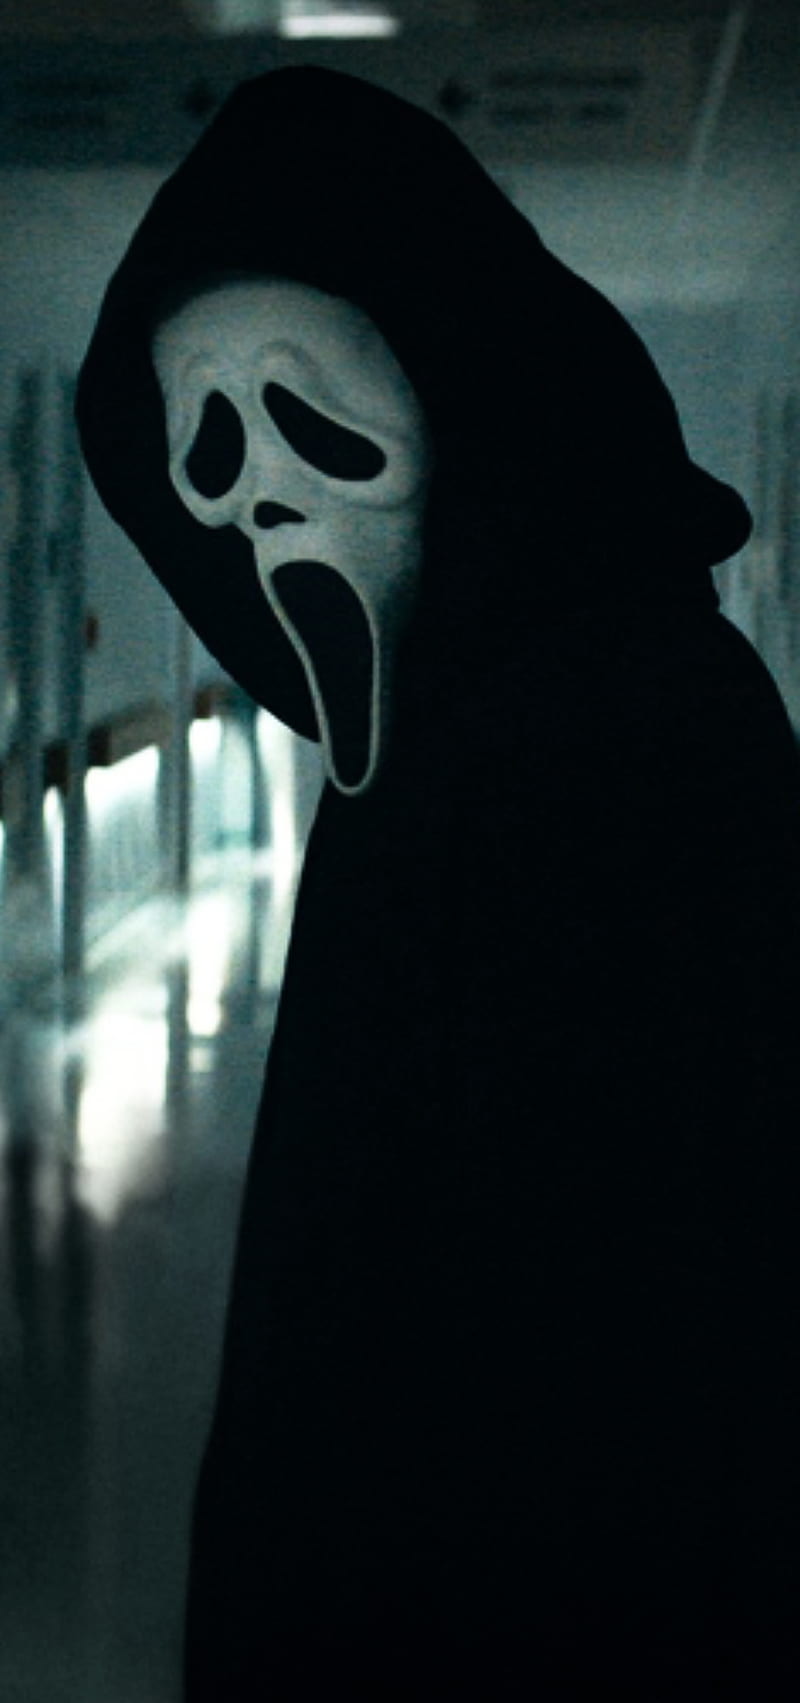 HD wallpaper: white ghost face mask, Scream, movies, horror, black  background | Wallpaper Flare